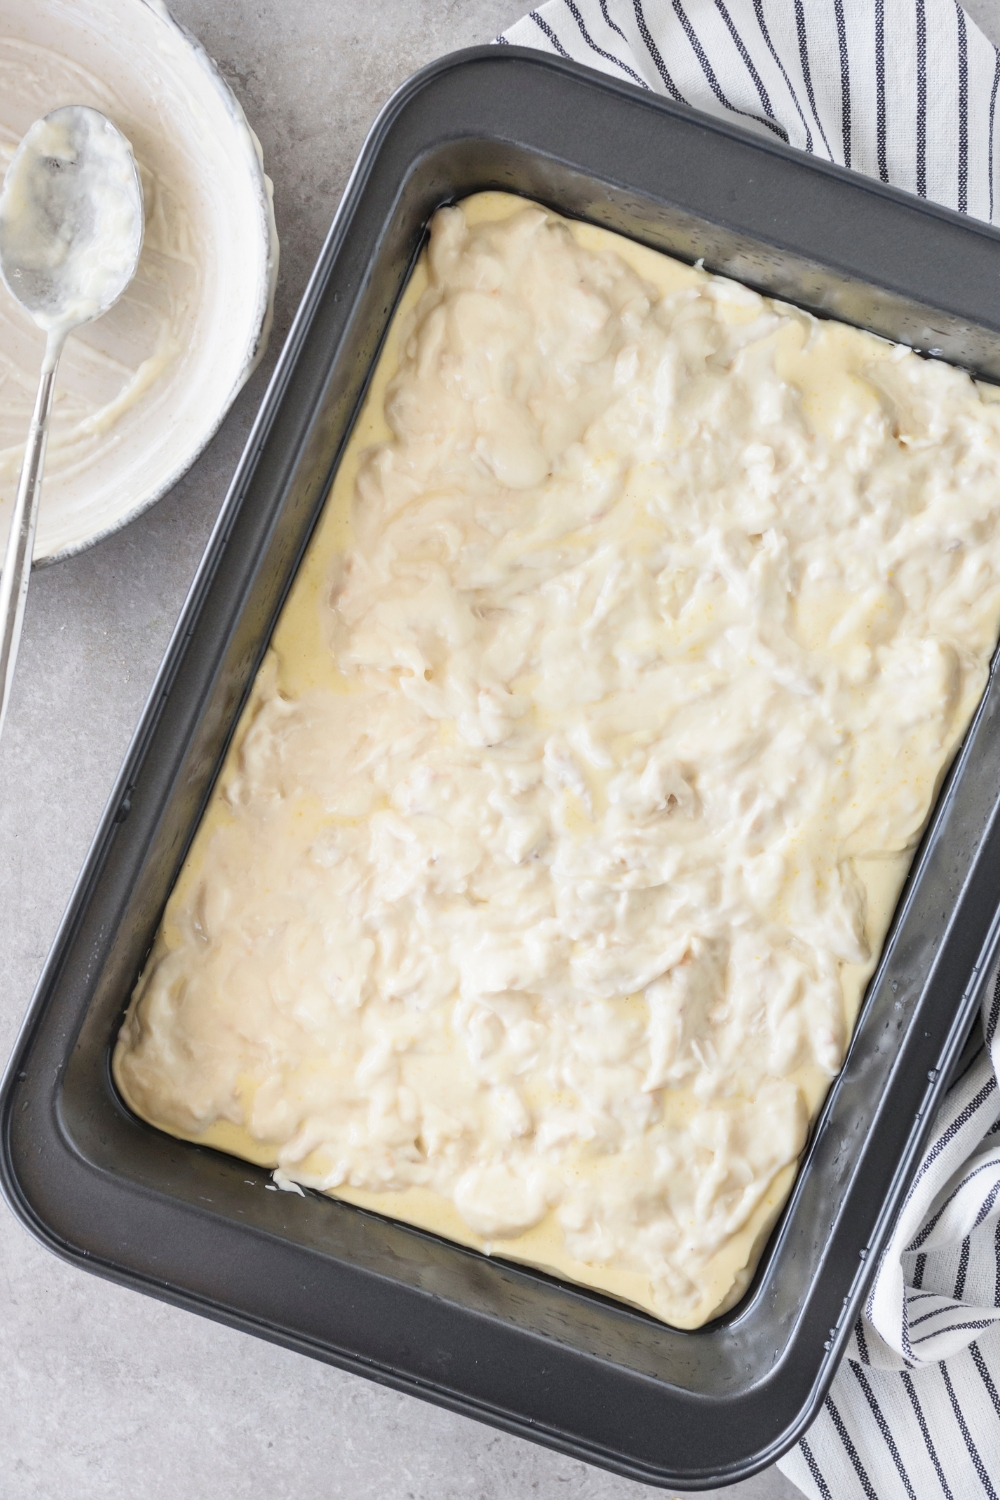 A baking dish filled with shredded chicken in a creamy sauce.